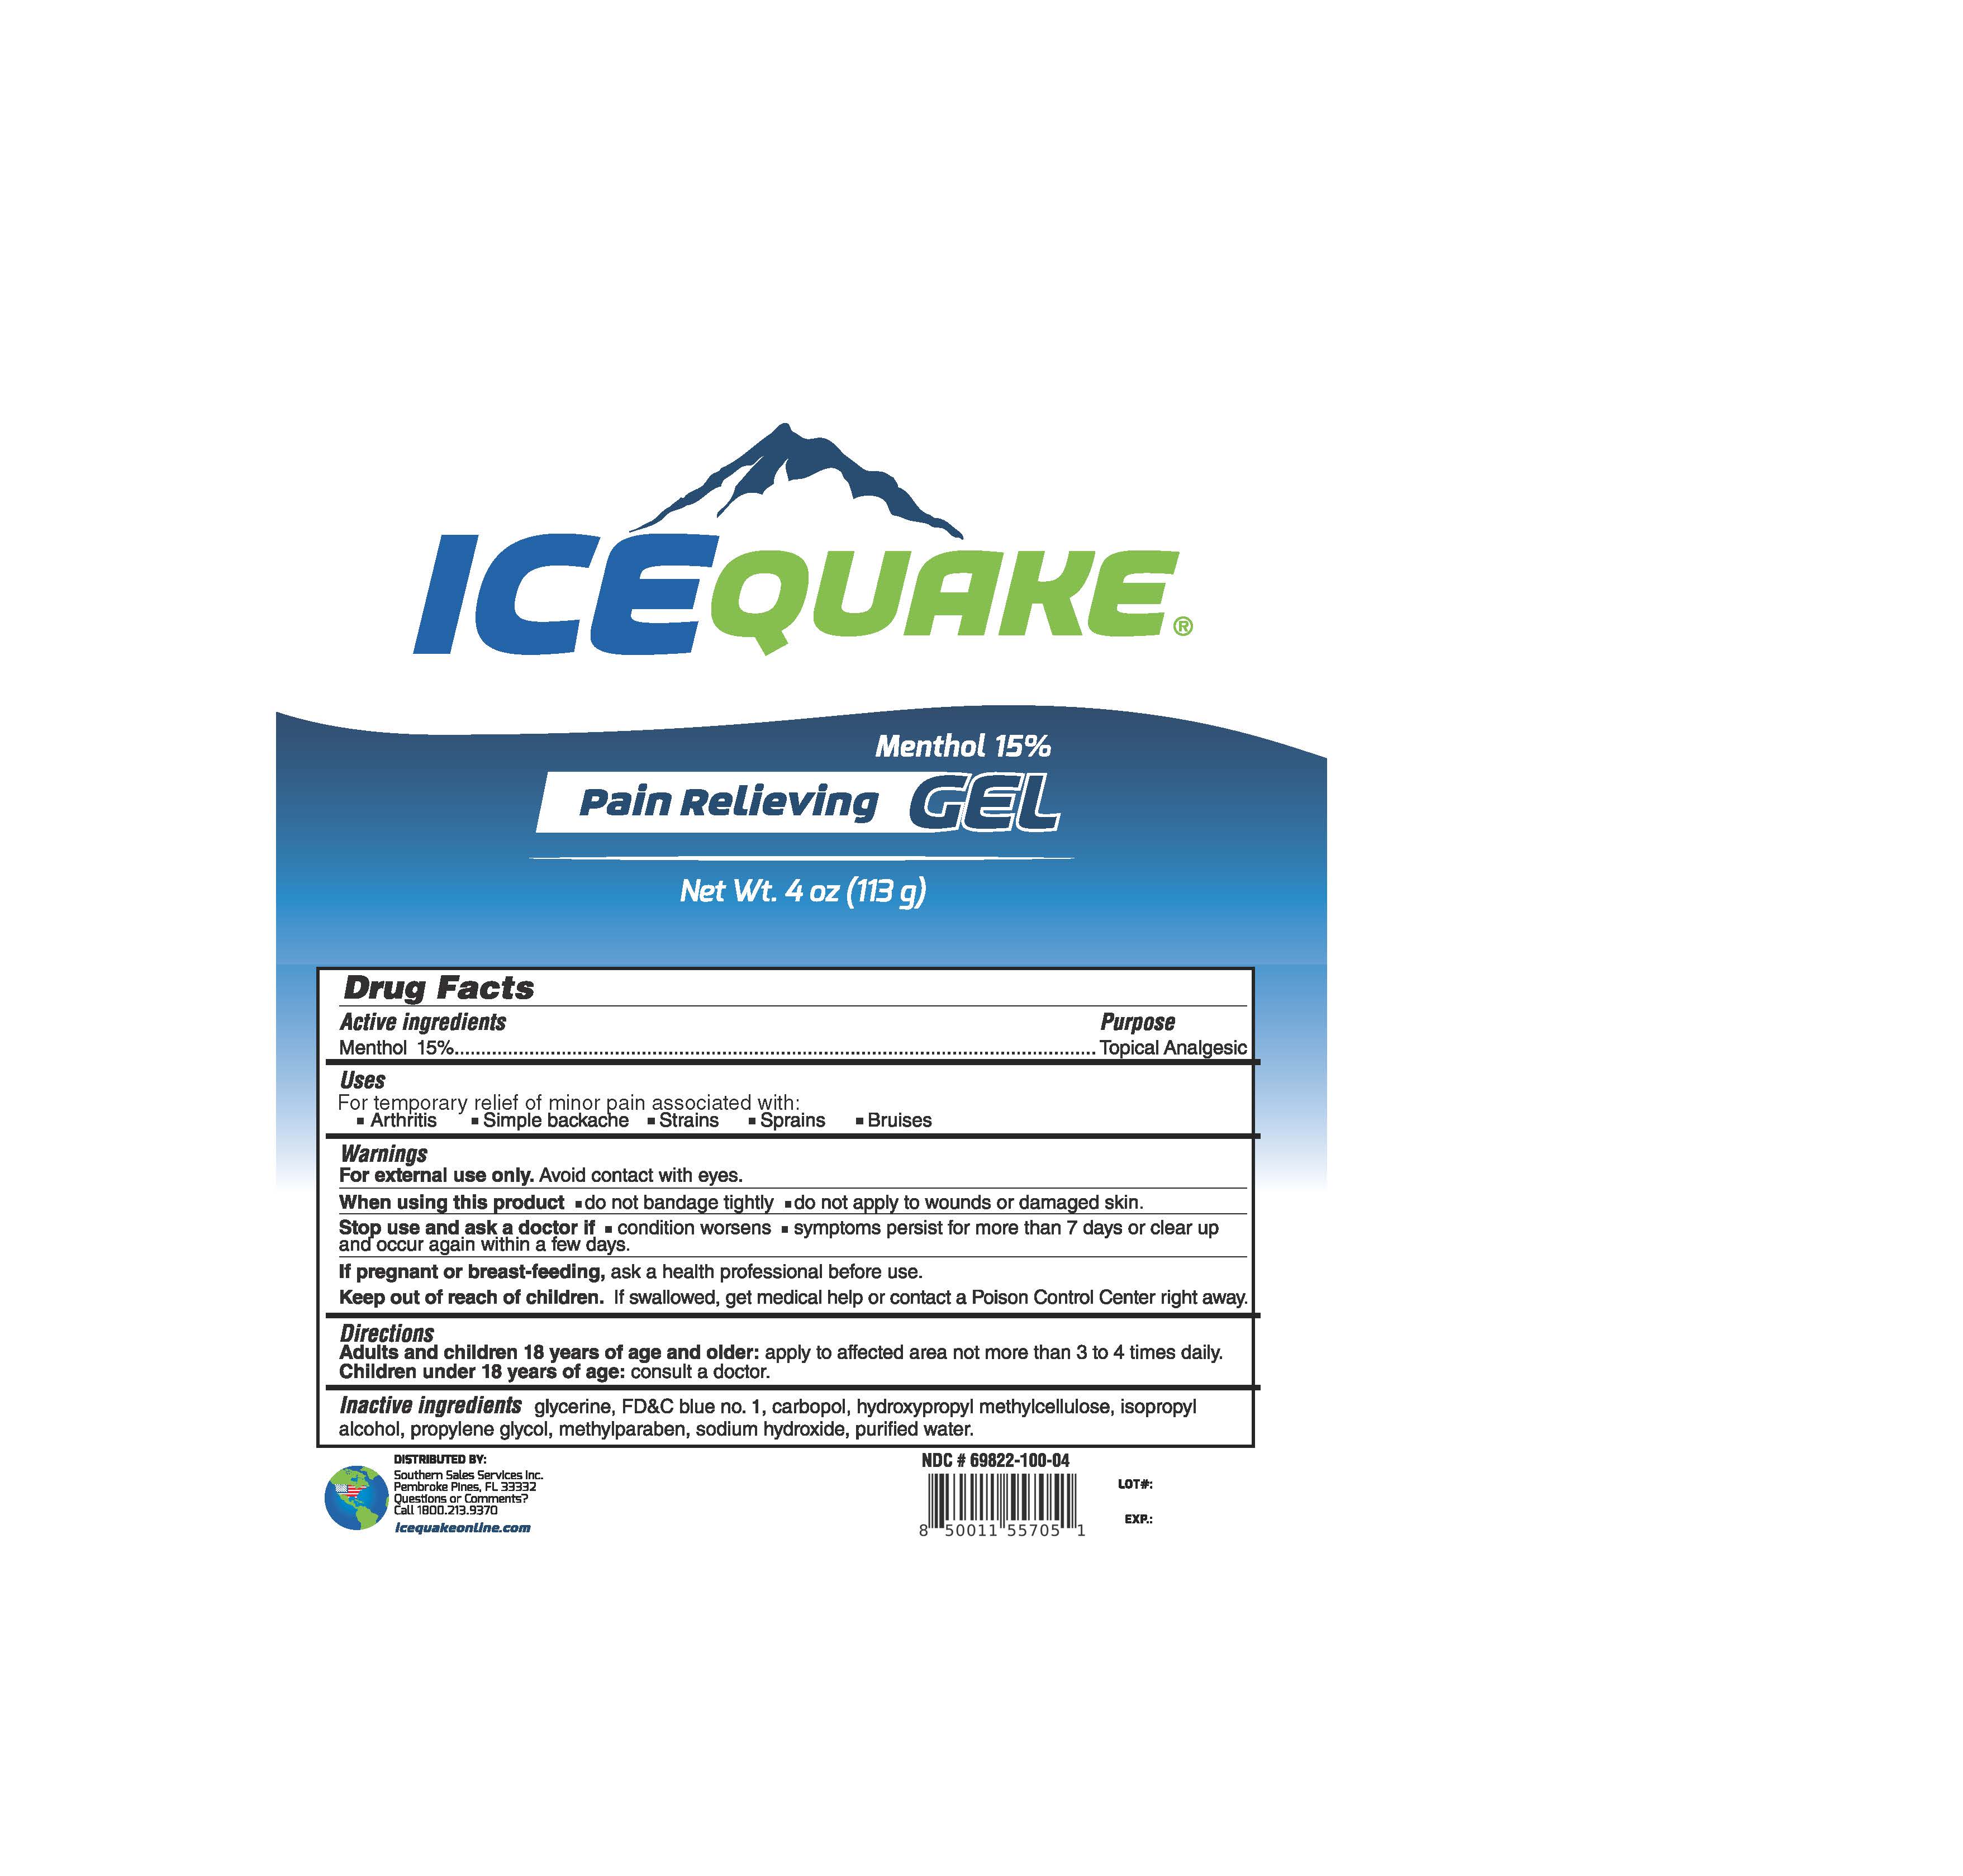 IceQuake Pain Relieving Gel 4 oz 113g